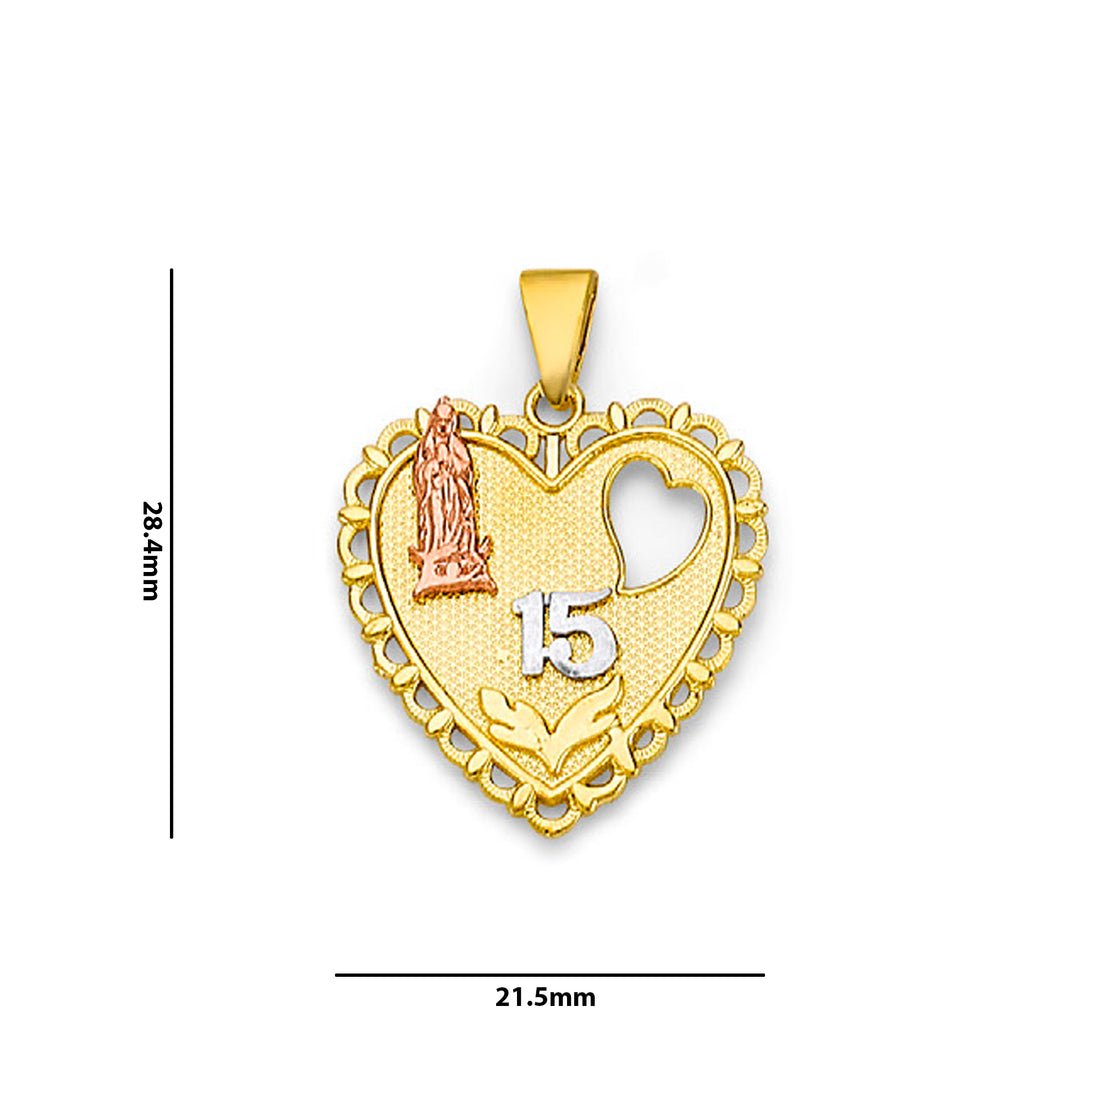 Two Tone Gold Virgin Mary Quinceañera Birthday Heart Shape Pendant with Measurement